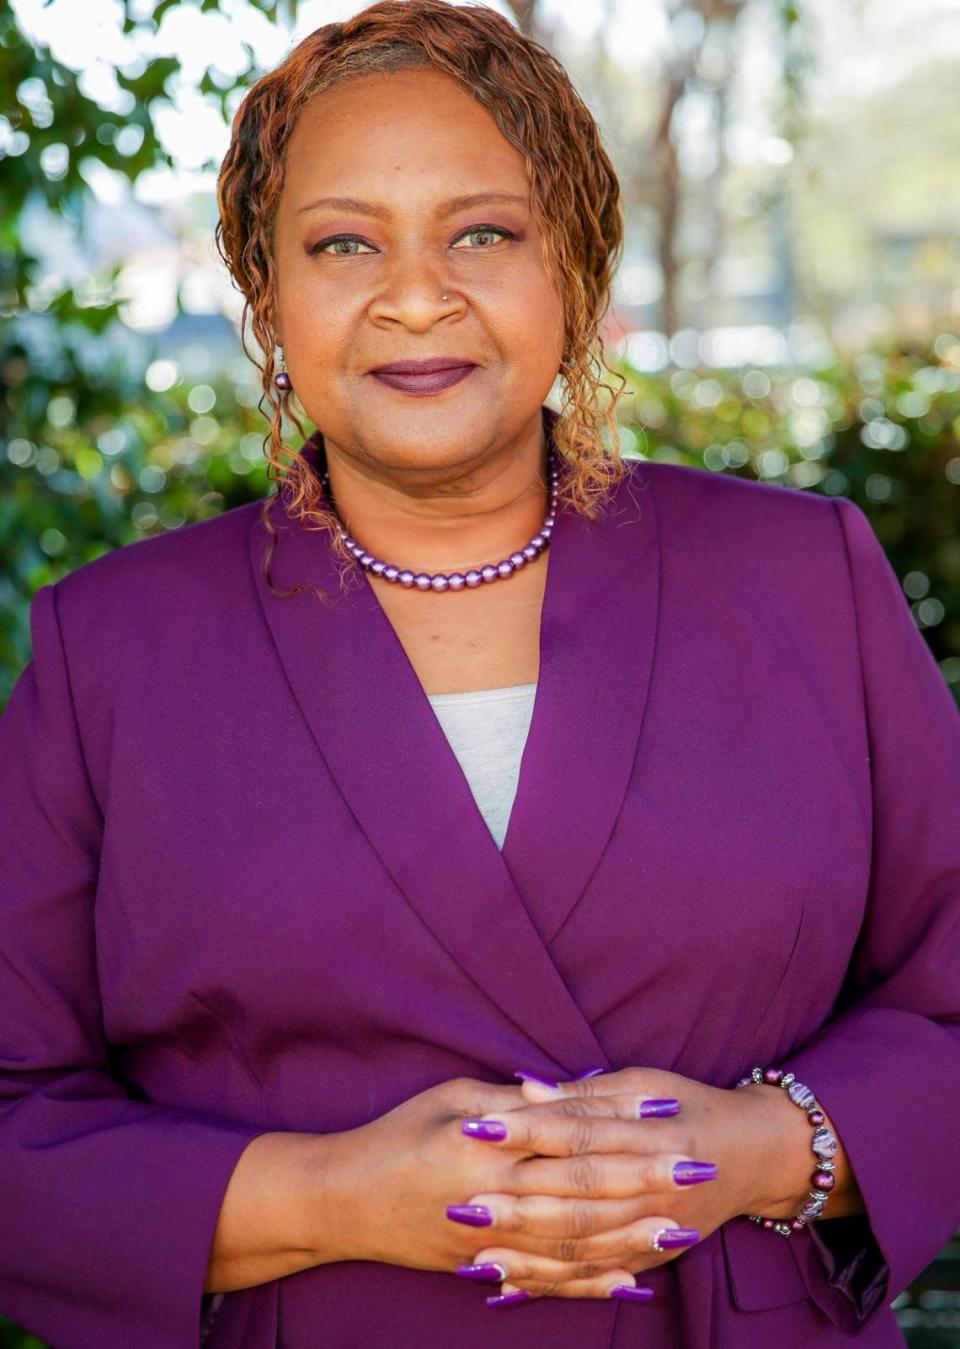 Yvette Townsend-Ingram is running for Mecklenburg Board of County Commissioners at-large in 2022.